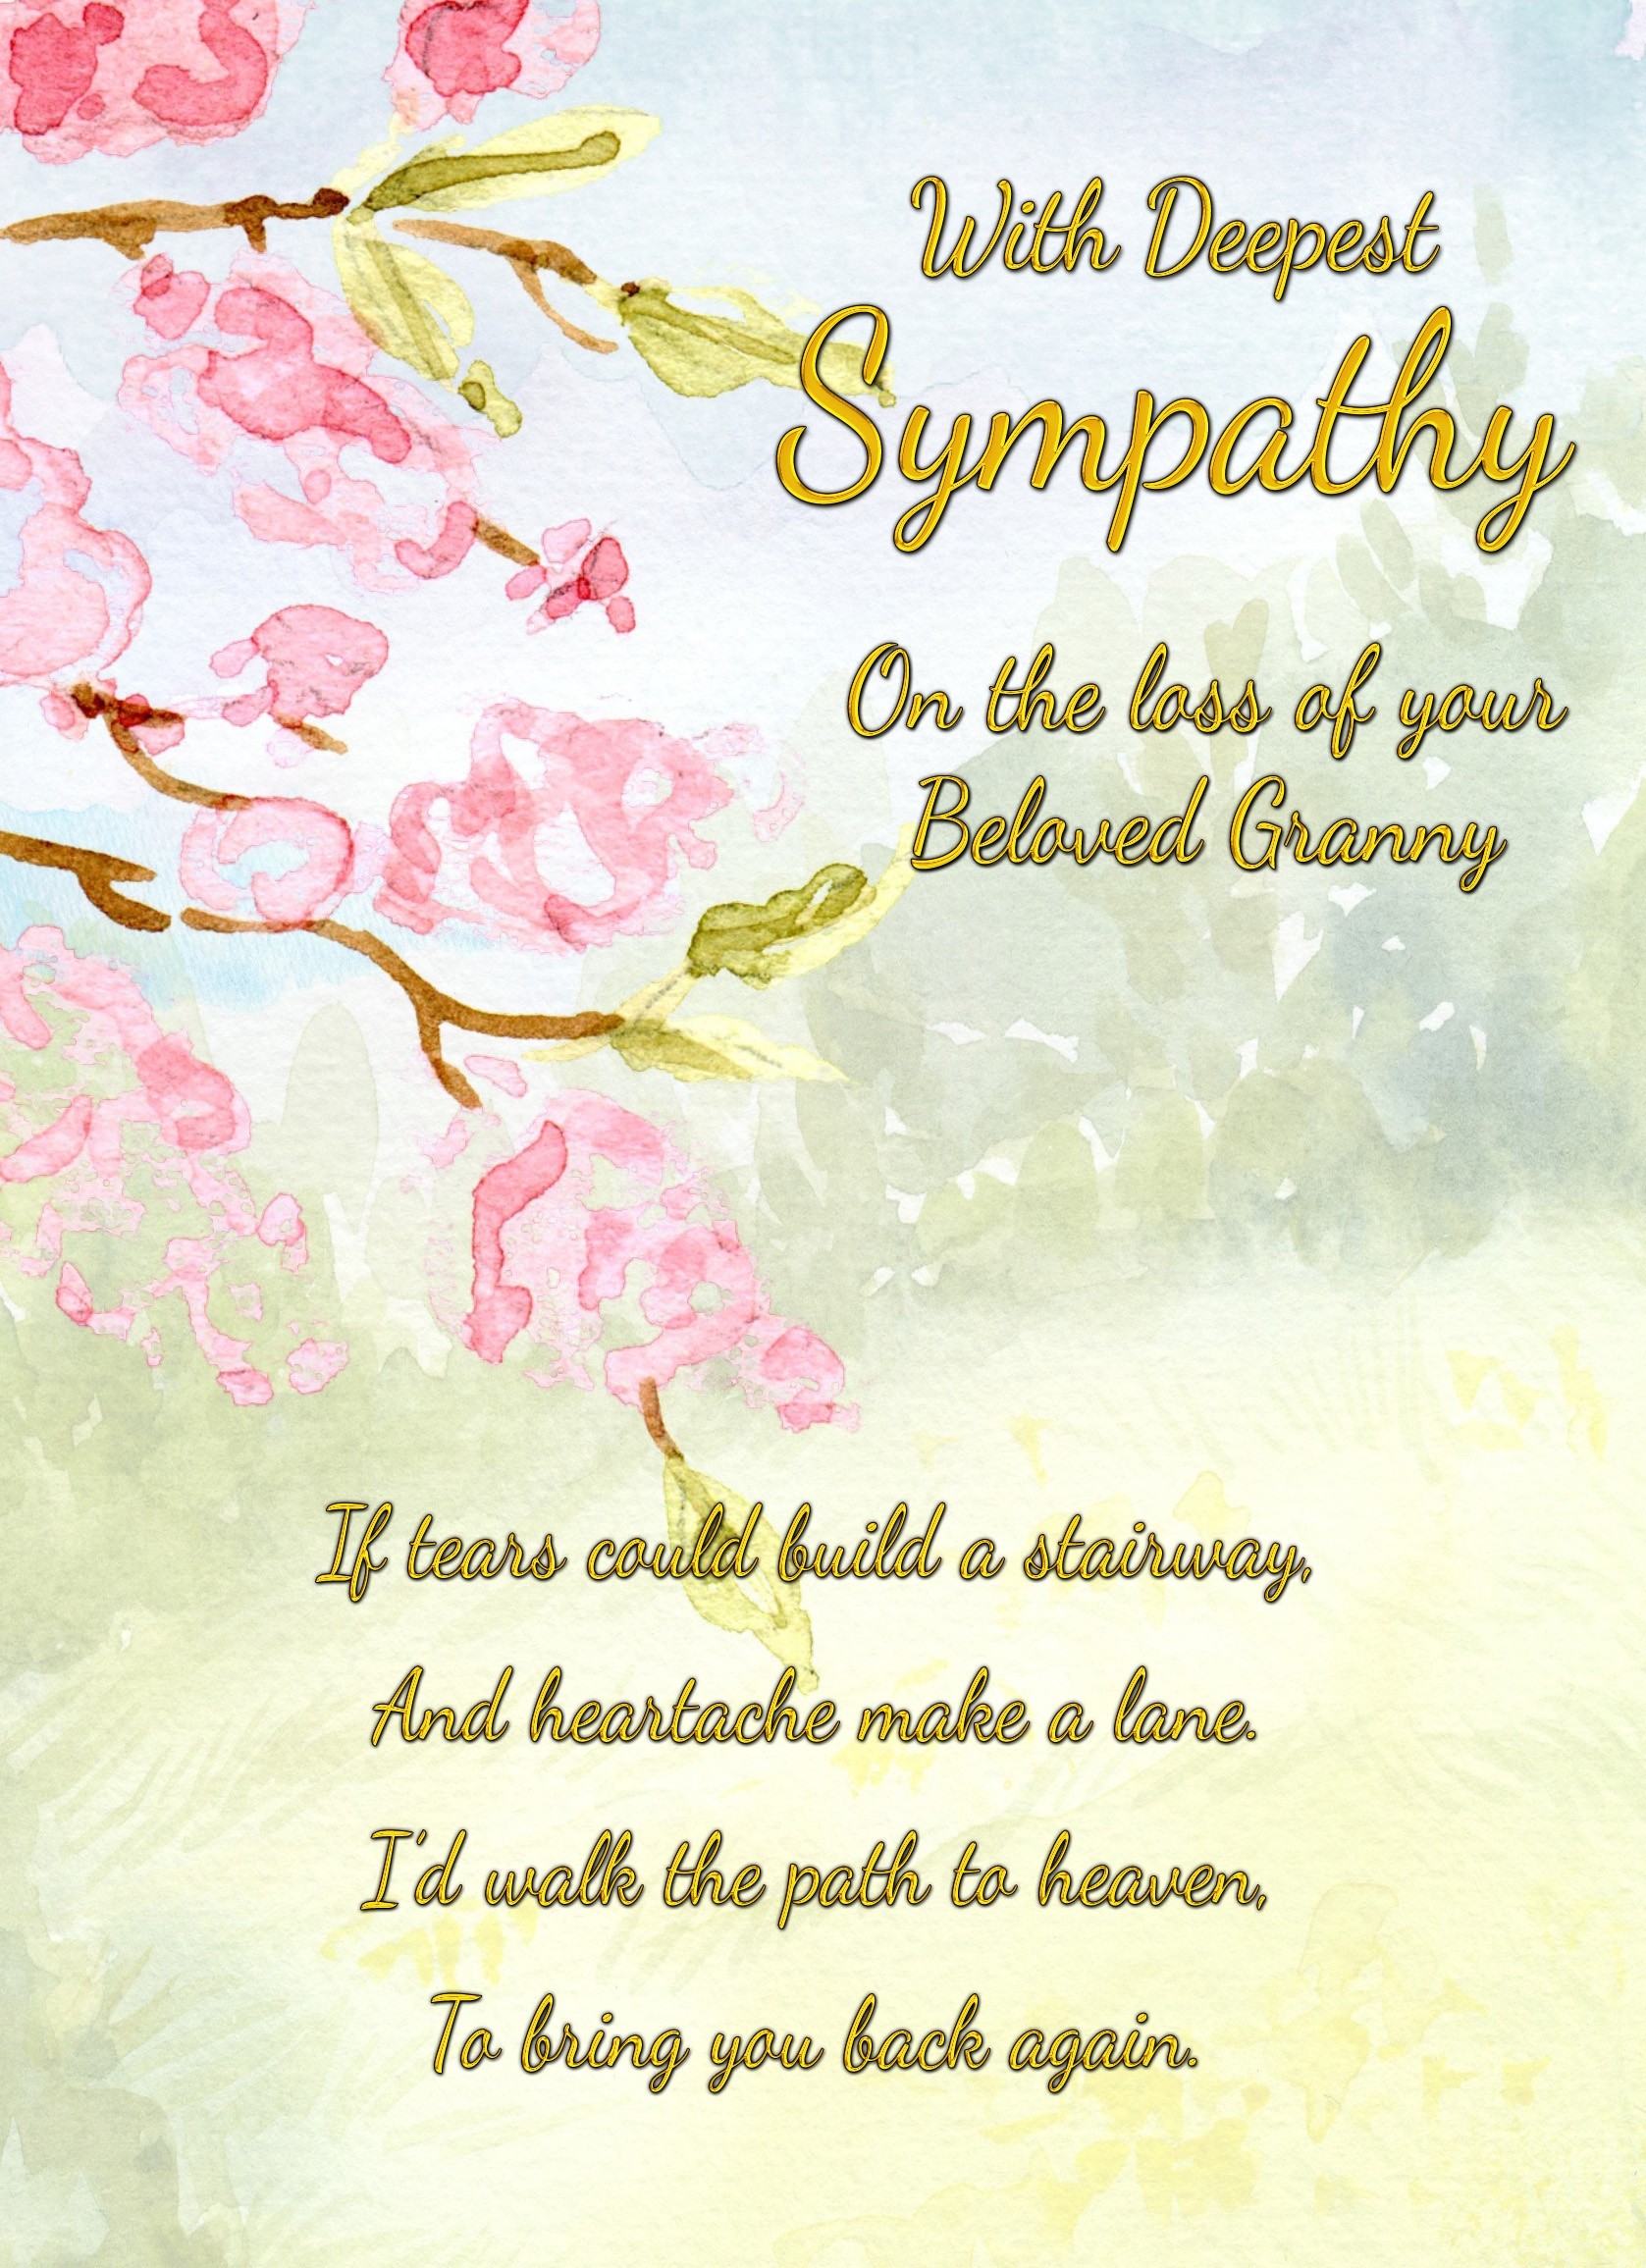 Sympathy Bereavement Card (With Deepest Sympathy, Beloved Granny)